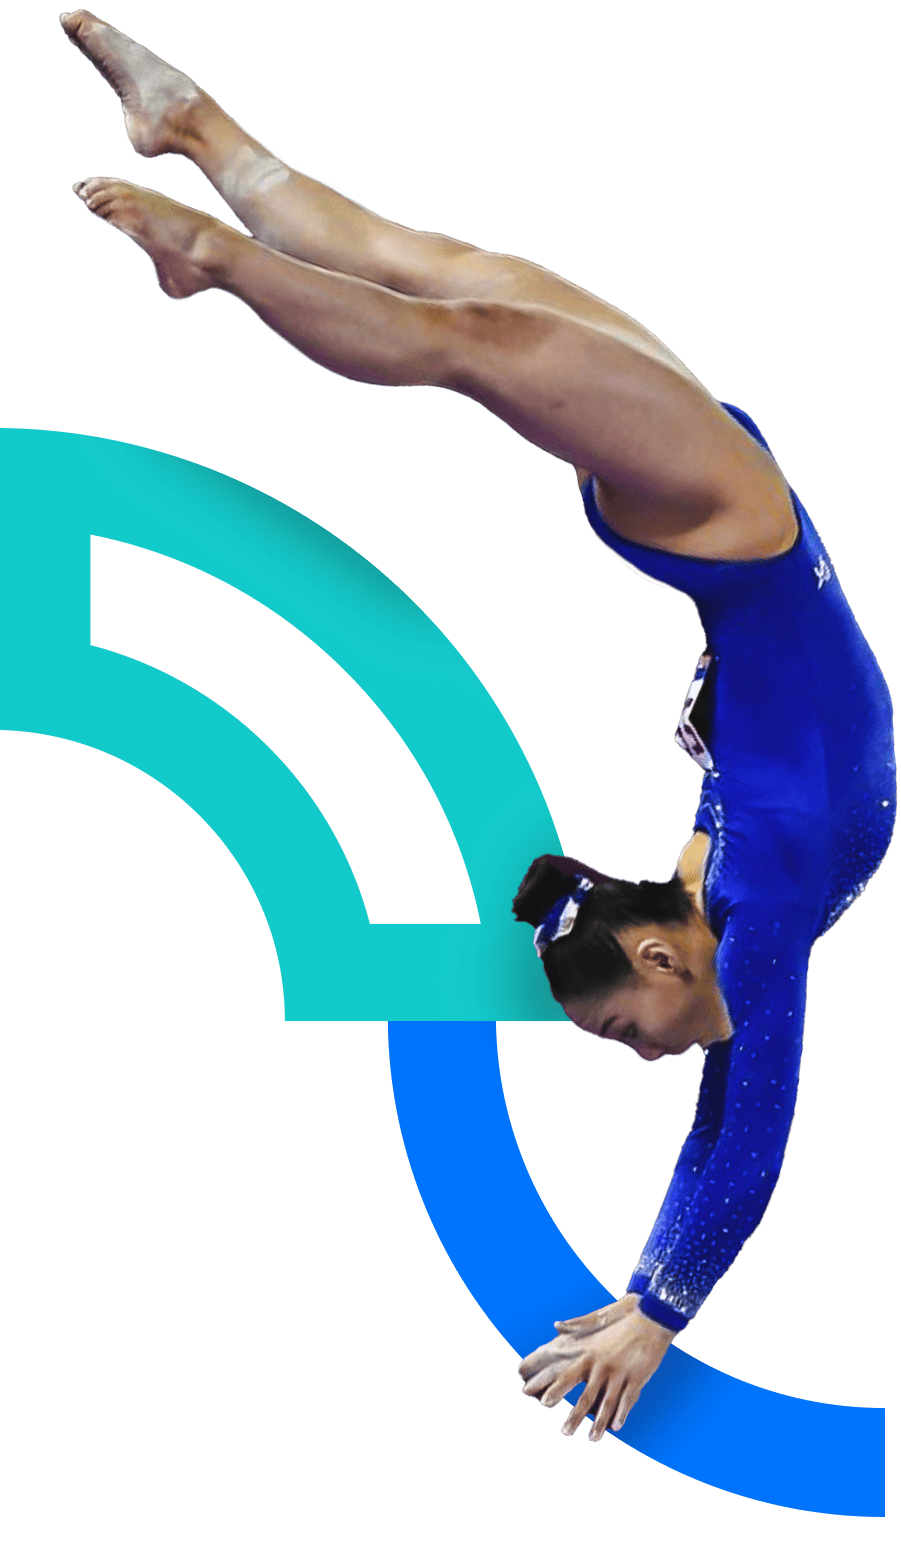 In the picture, the body of a female gymnast that is jumping can be seen. She is wearing a blue uniform. Her legs are extended and her hand in position of holding a device of the discipline. 